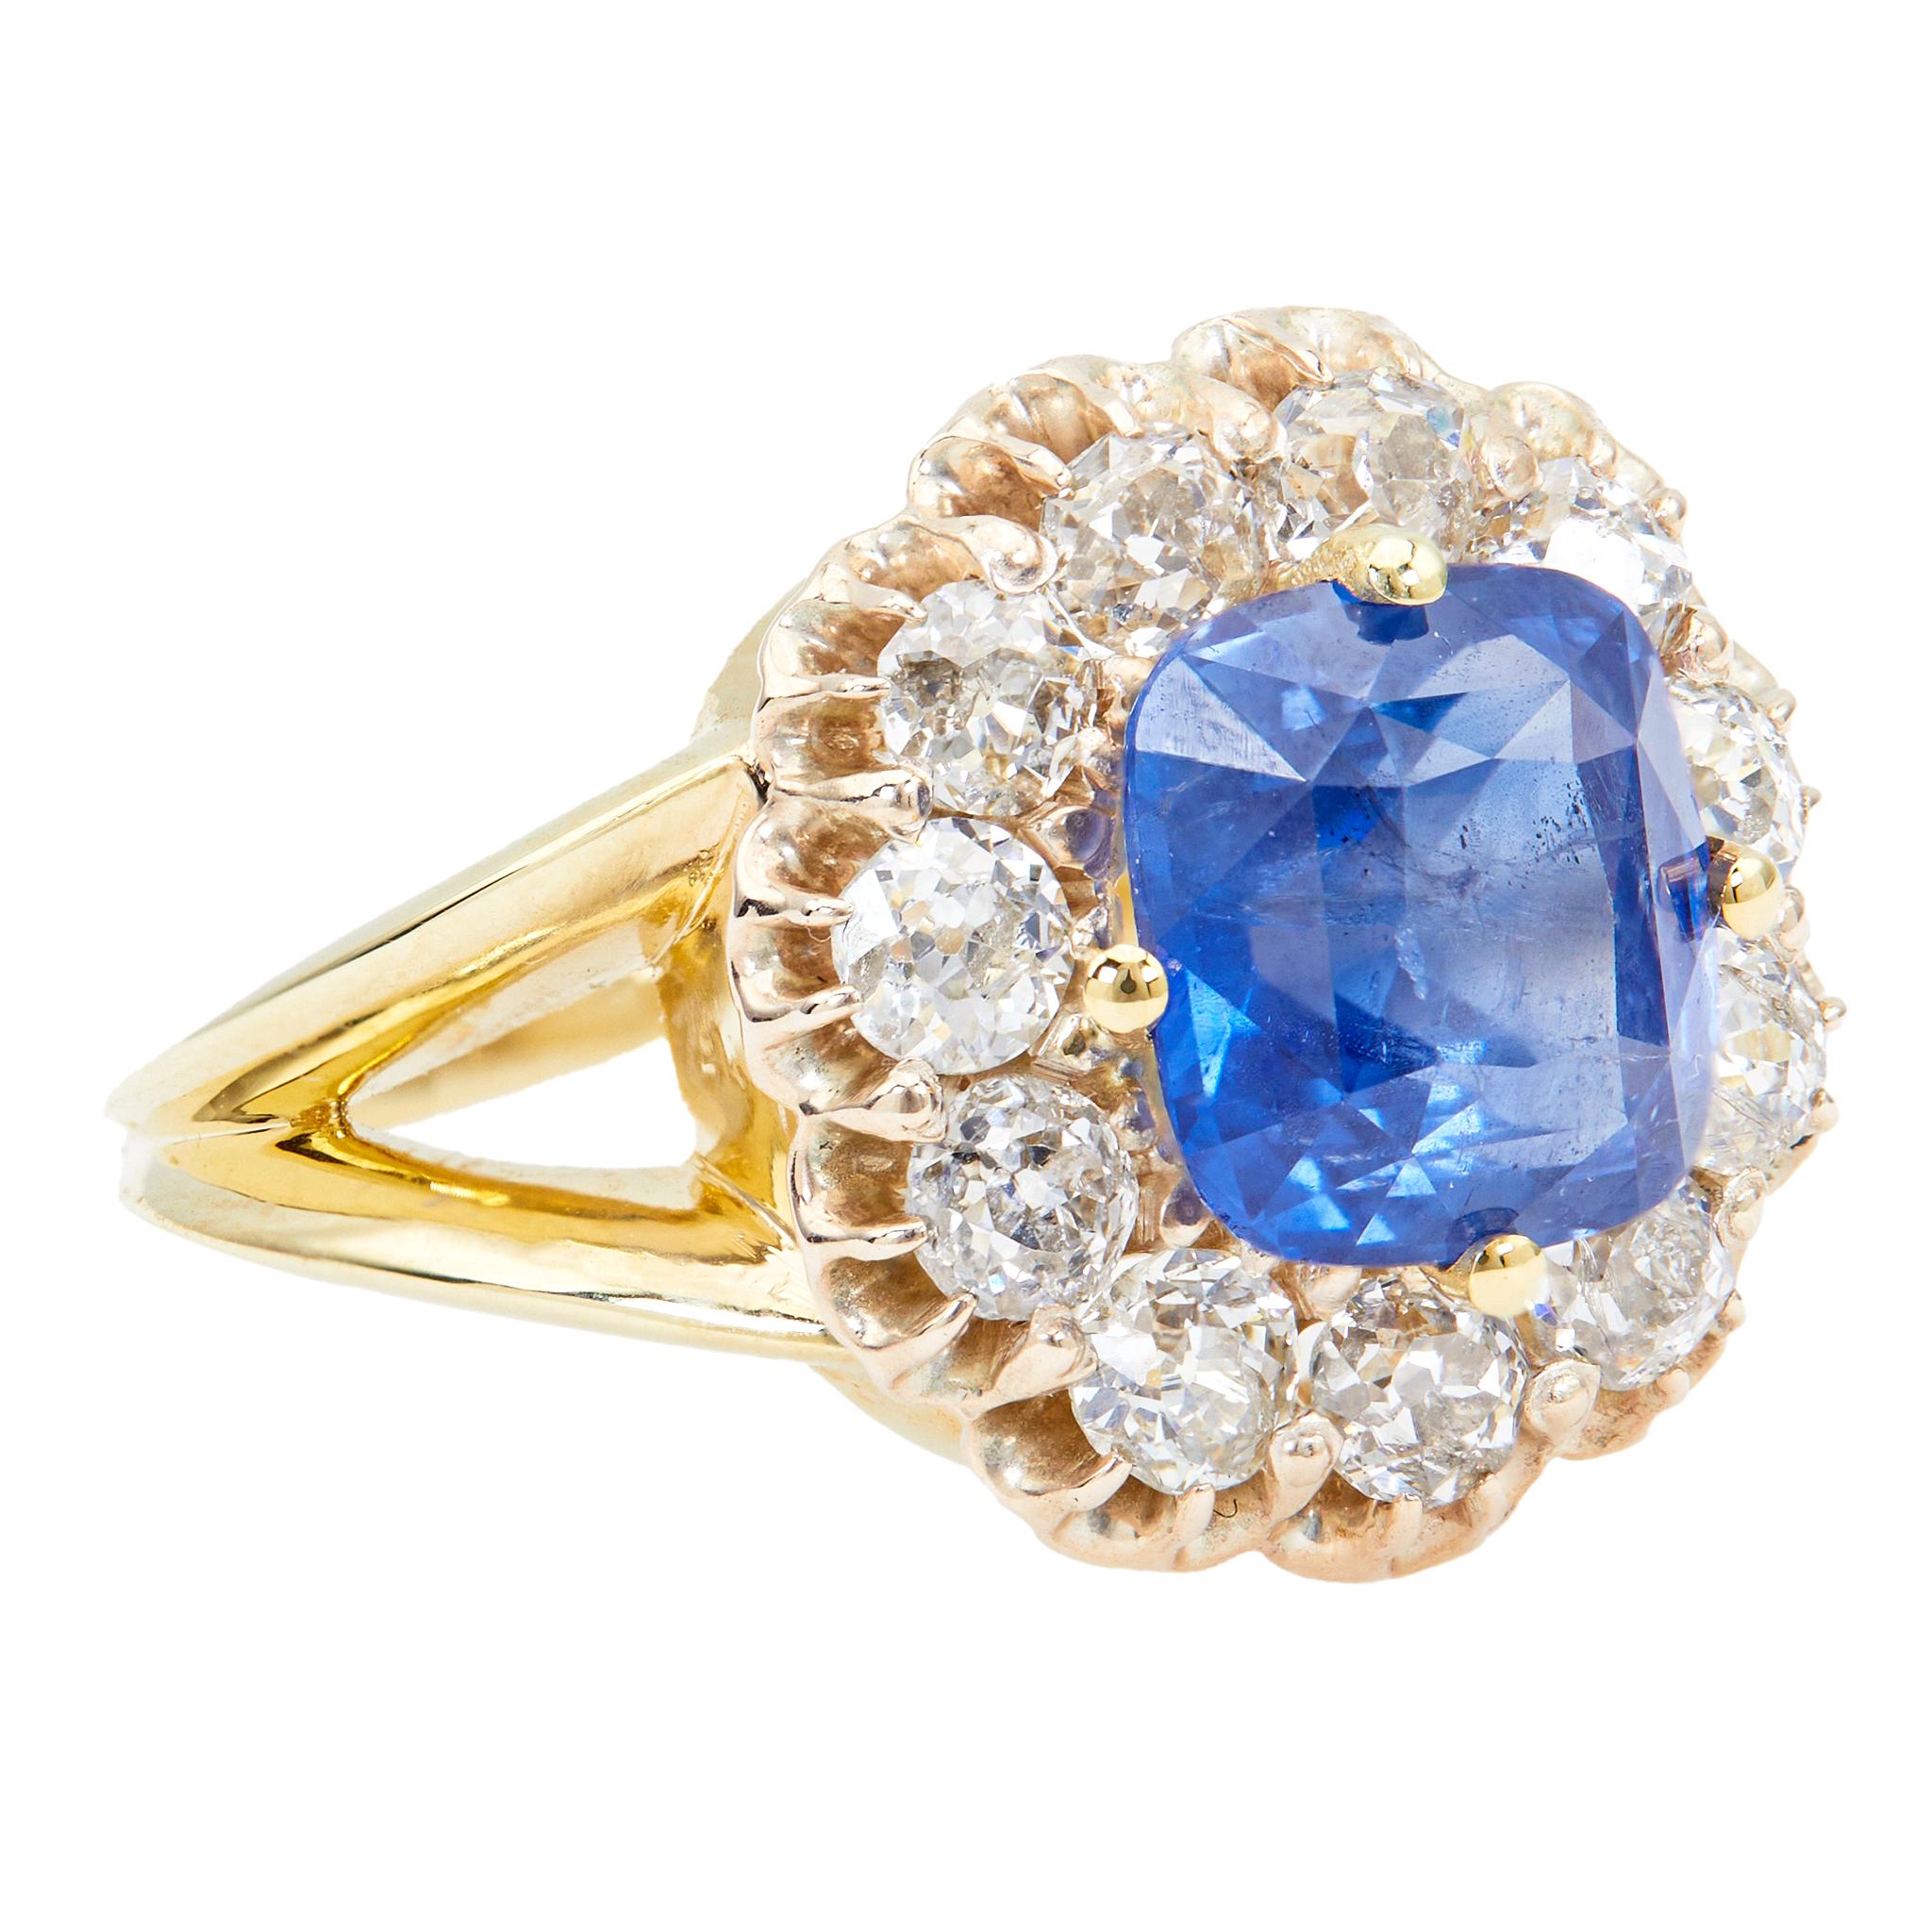 Women's or Men's Late Victorian GIA 3.33 Carat Ceylon Sapphire and Diamond 14k Gold Cluster Ring